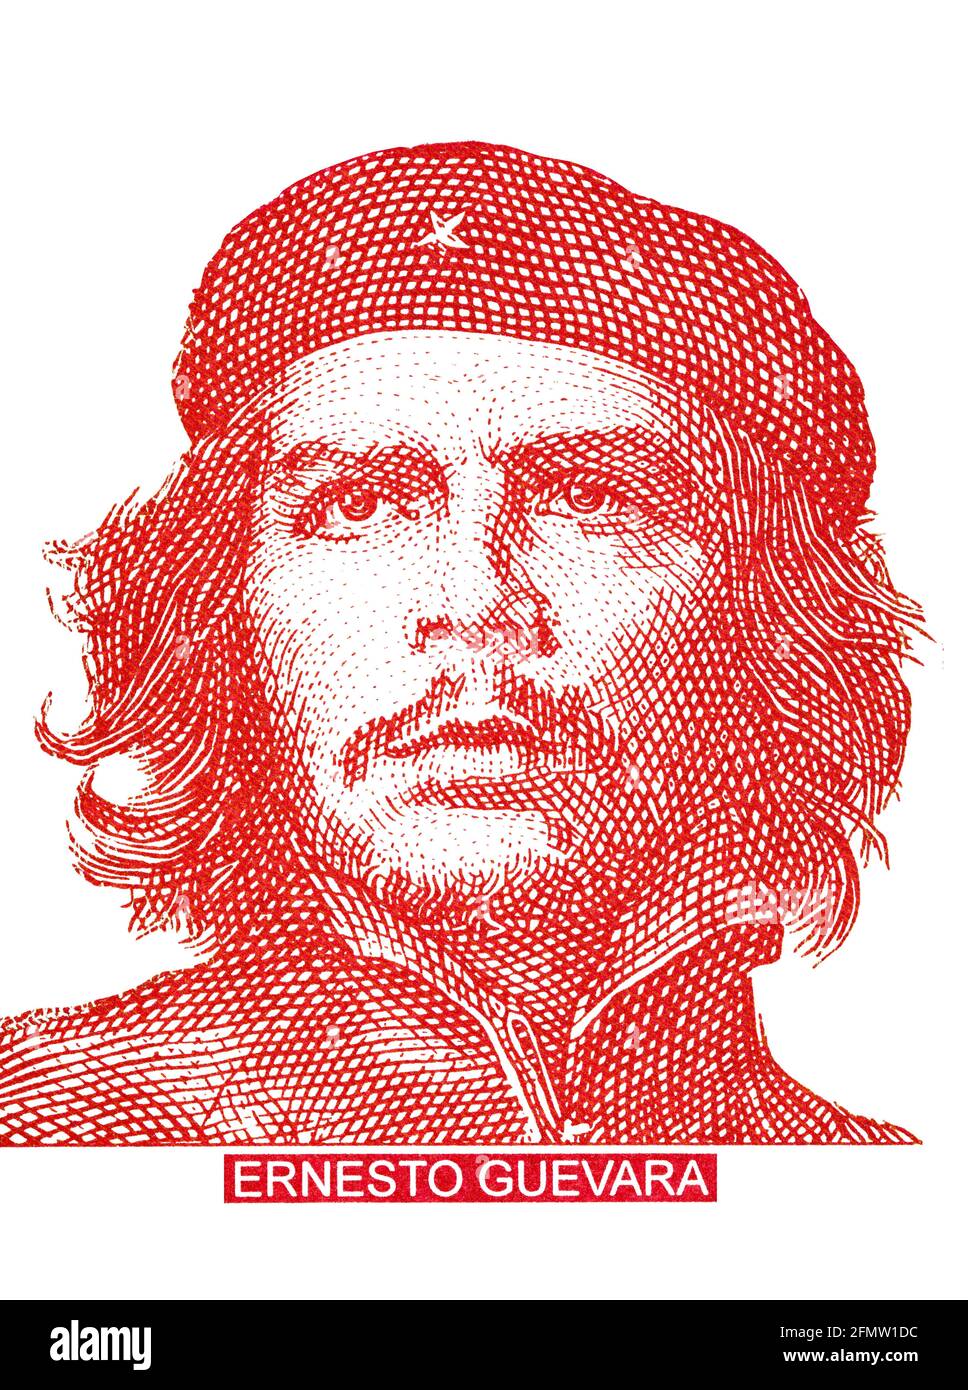 Portrait of Ernesto Che Guevara historical leader of Cuba on three peso  banknotes, isolated on white background Stock Photo - Alamy